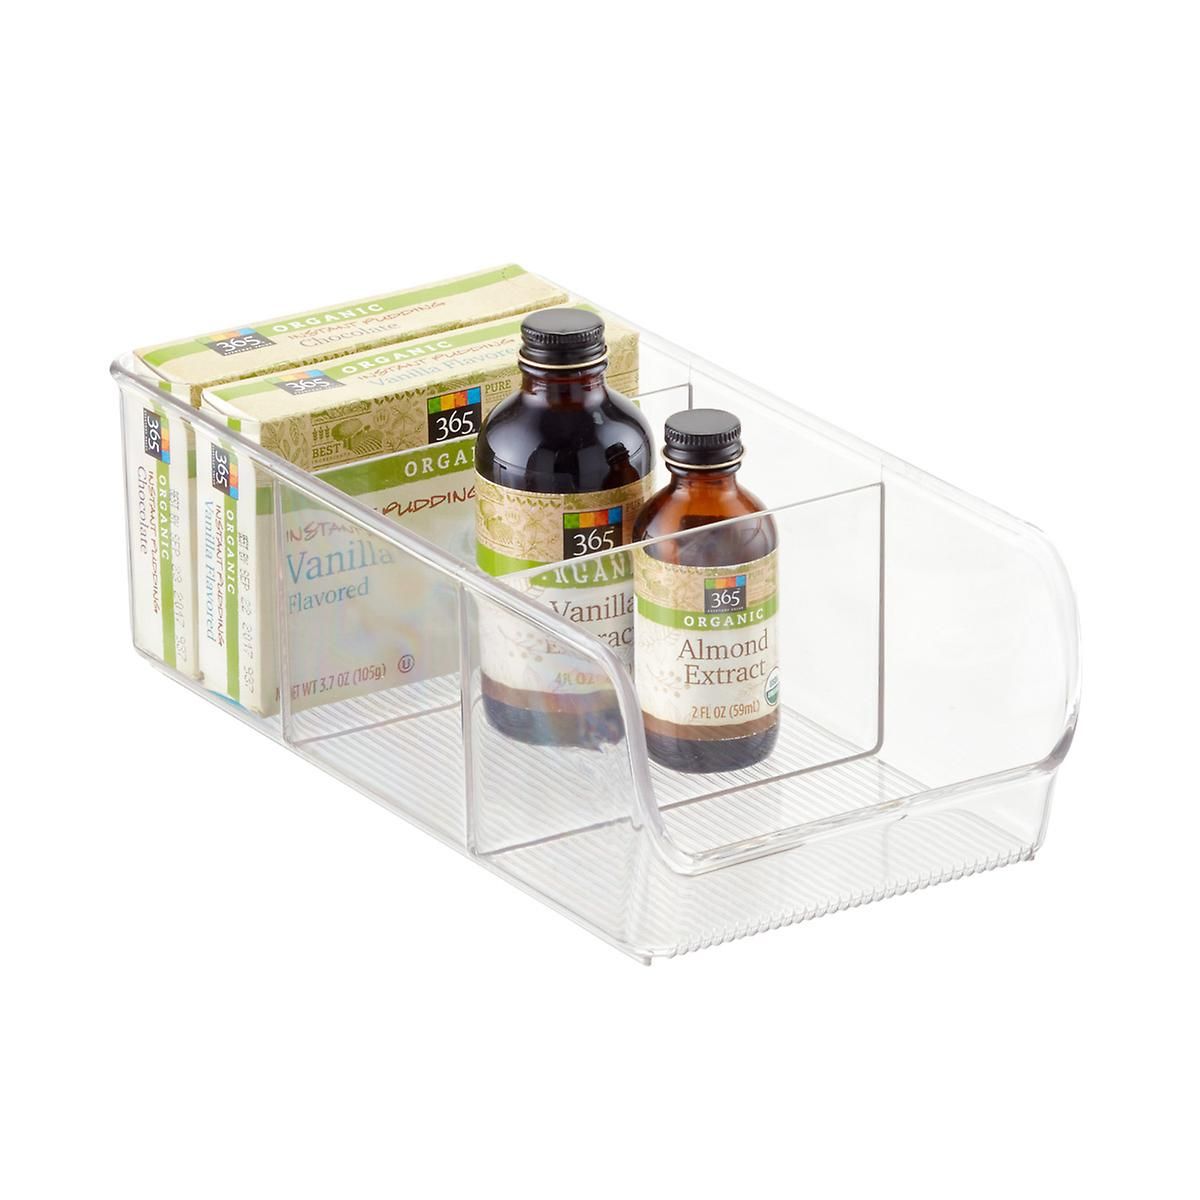 iDesign Linus 3-Section Divided Cabinet Organizer | The Container Store